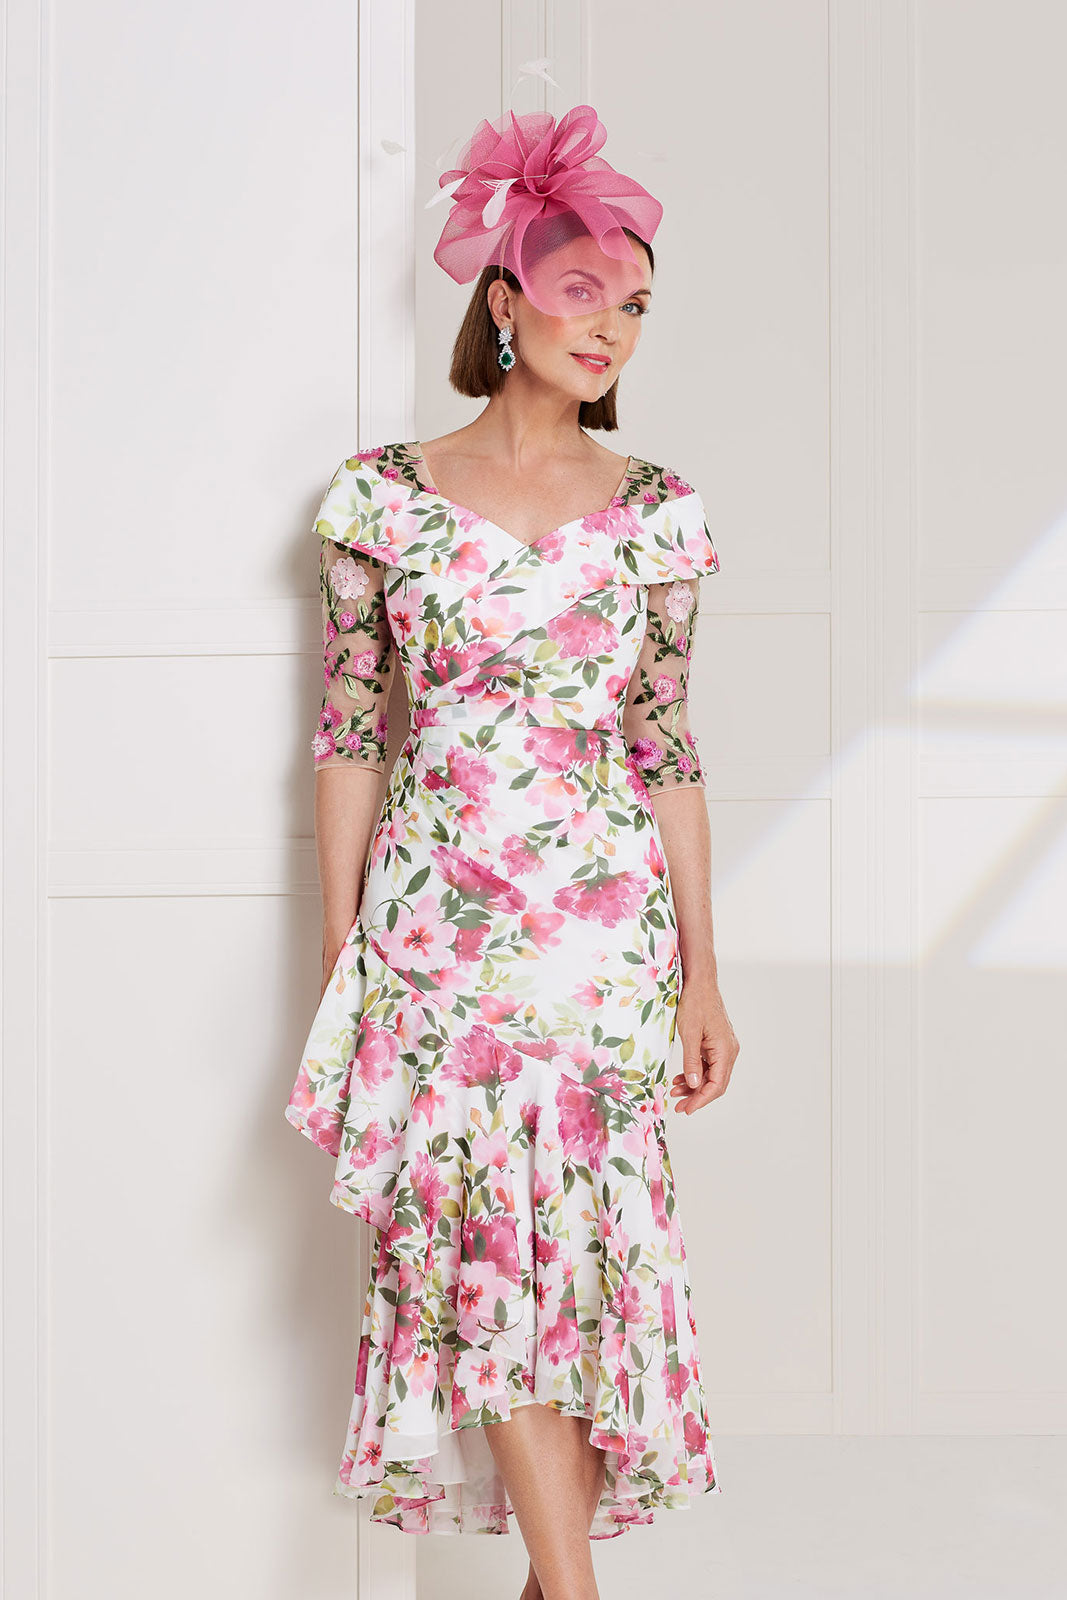 Pink & White Floral Print Dress with Embroidered Detail& Frill Bottom